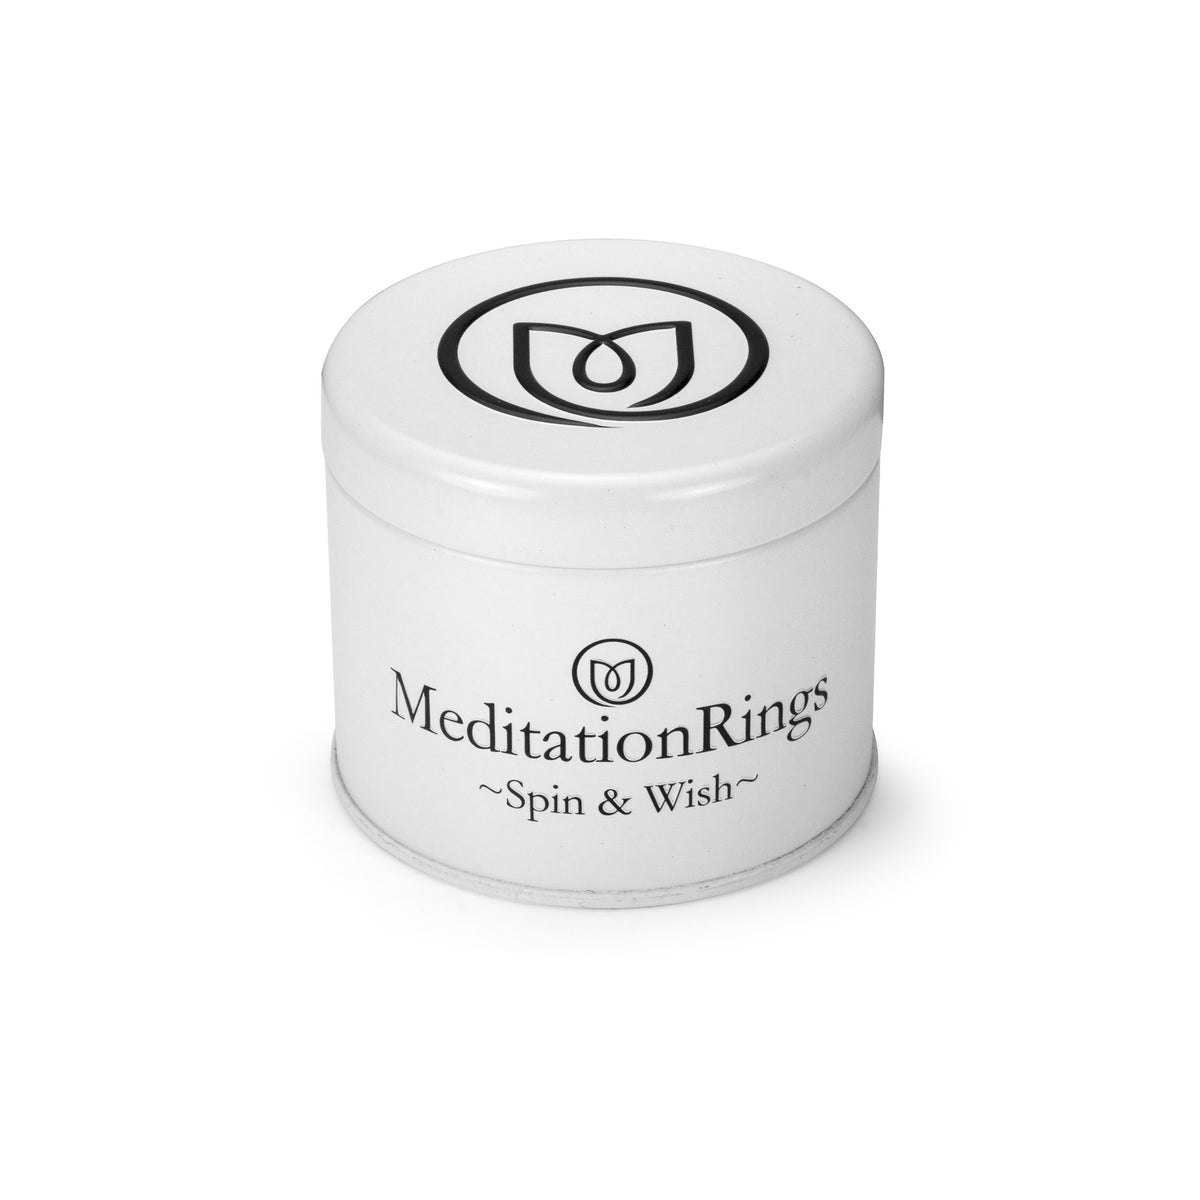 meditation ring, spinner ring, fidget ring, worry rings, sterling silver spinner ring, online anxiety store, anxiety store, anxiety gone, natural anxiety relief, natural cures for anxiety, anxiety attack, dealing with anxiety, overcoming anxiety, anxiety program, over coming anxiety, coping with anixety, help with anxiety, how to treat anxiety, anxiety subscription box, anxiety box, mental health subscription box, wellness subscription box, healthy subscription box, 